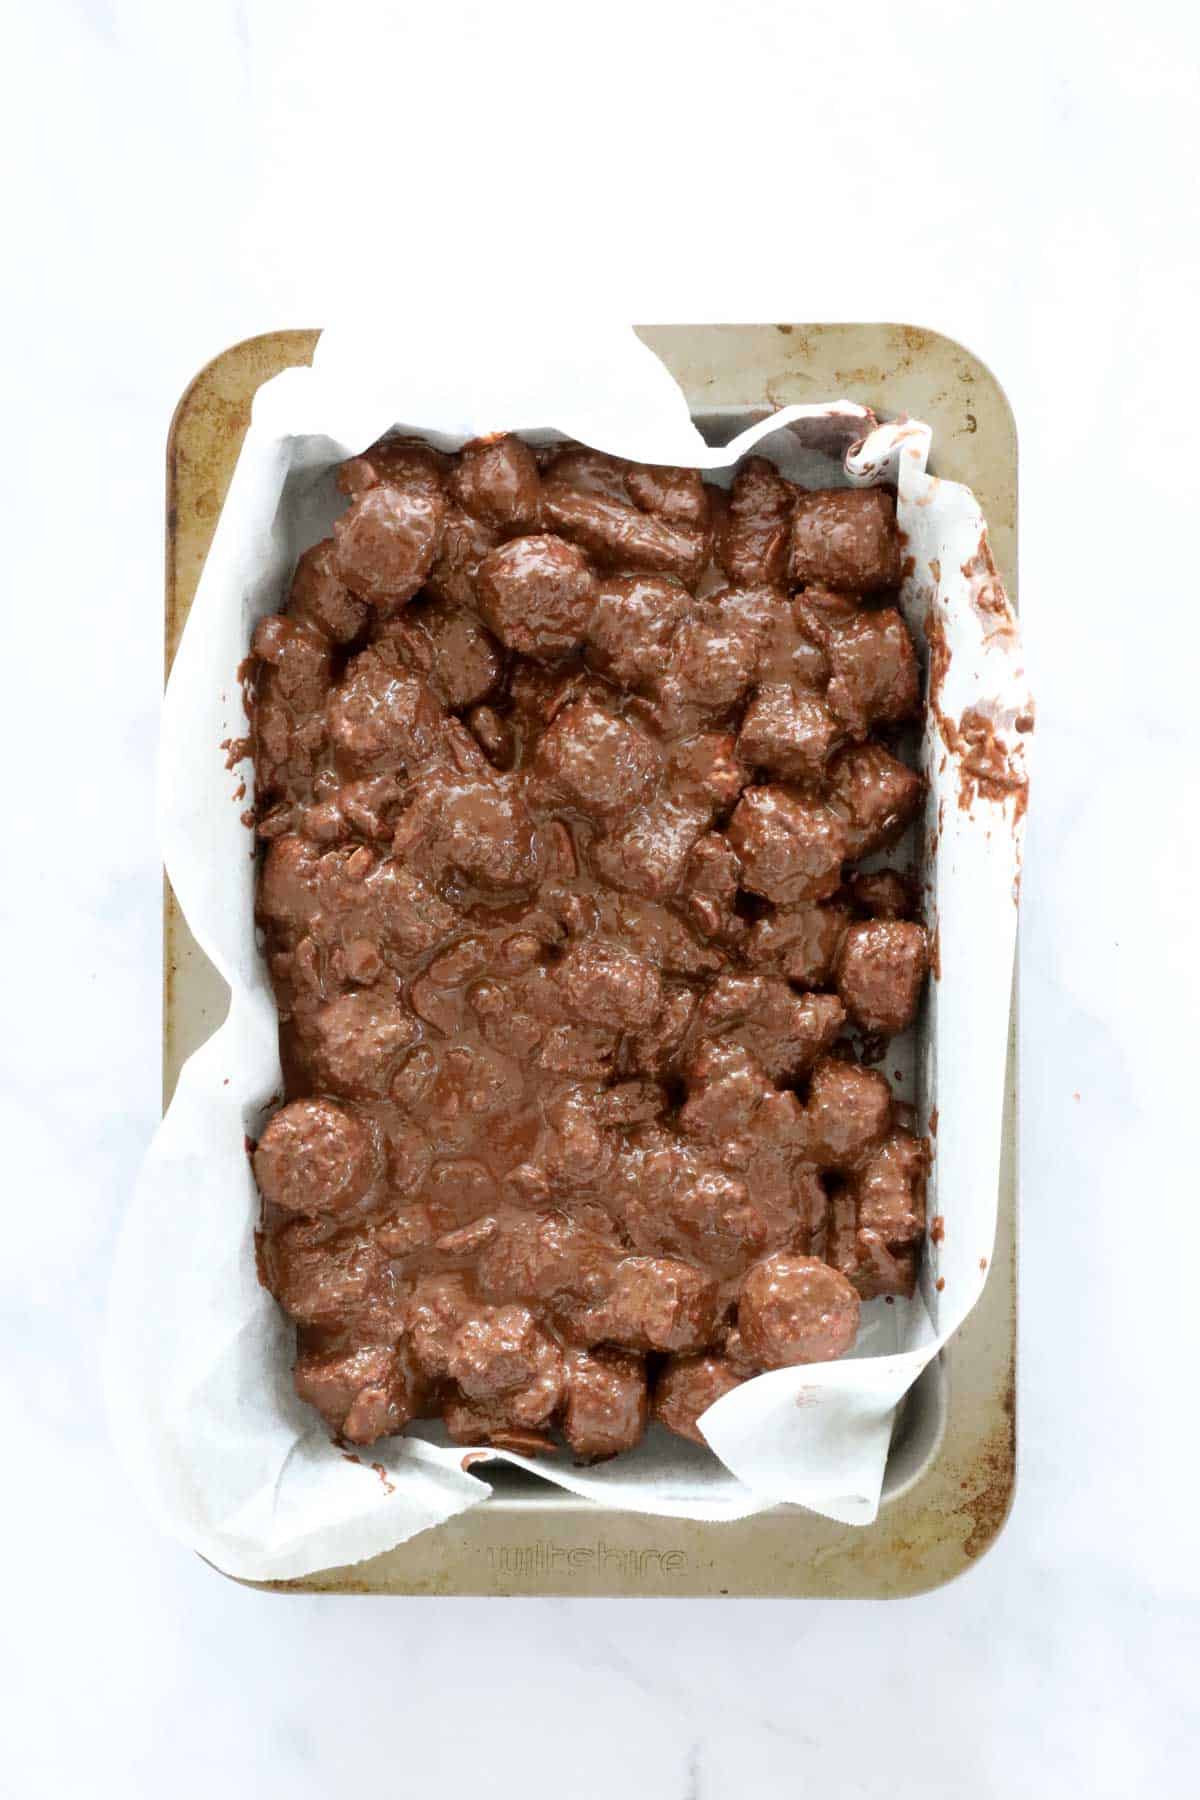 Rocky road in a baking tin.